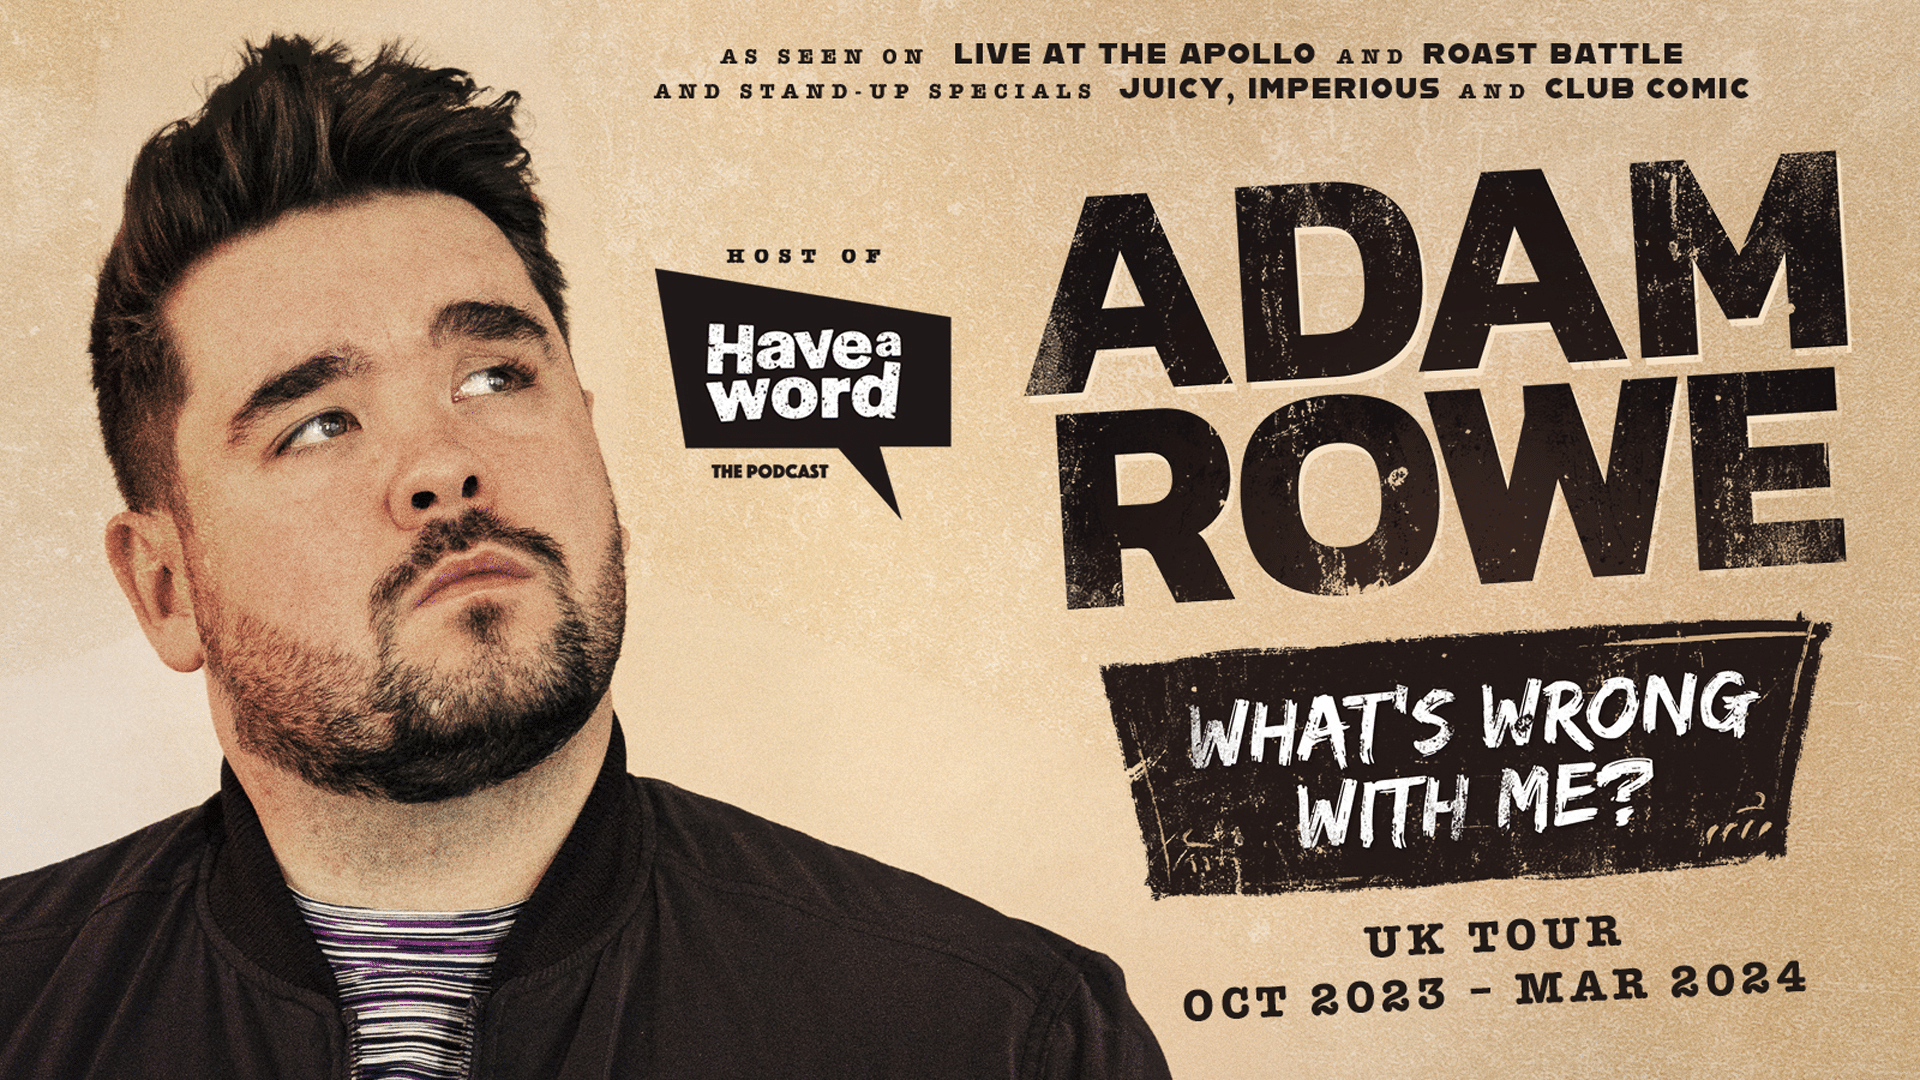 On the left, Adam Rowe with dark hair and a light beard, wearing a black jacket above a striped t-shirt, gazing upwards towards the right of the picture. On the right, text reads: As seen on Live at the Apollo and Roast Battle and stand-up specials Juicy, Imperious and Club Comic; Host of Have a Word the Podcast; Adam Rowe; What's Wrong with Me? UK Tour Oct 2023 - Mar 2024